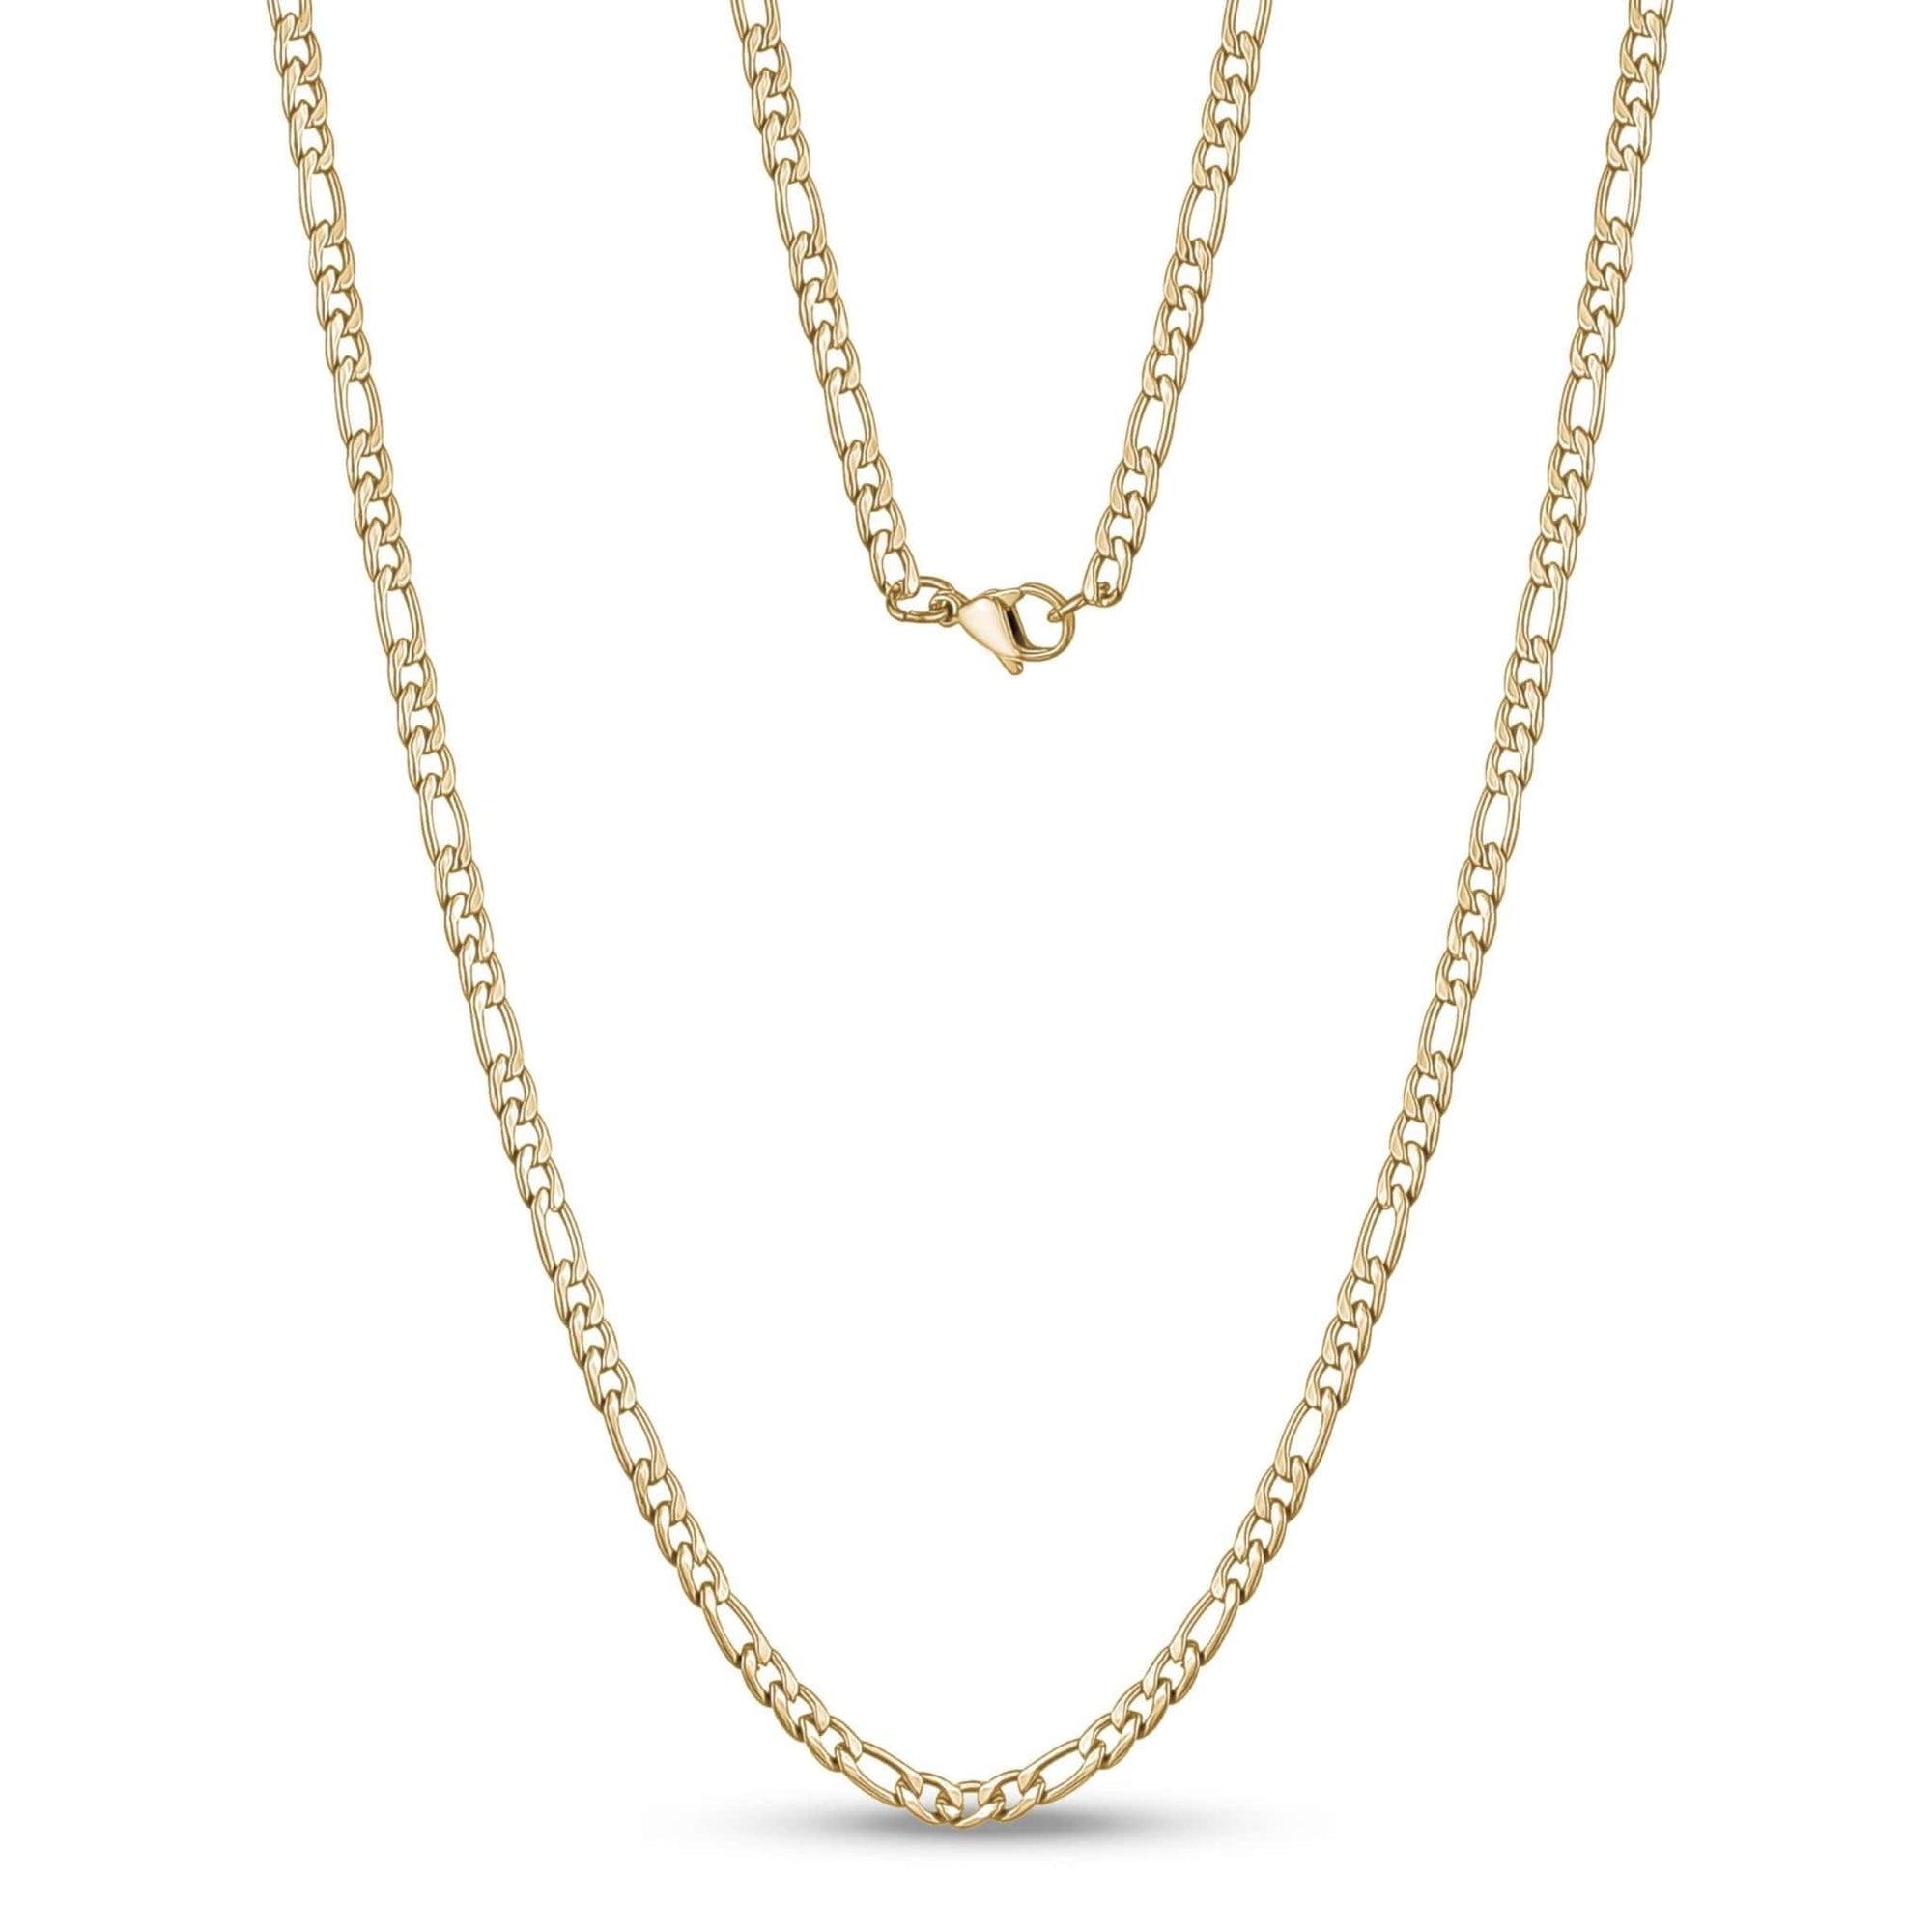 3.5mm Stainless Steel Figaro Link Chain Necklace at Arman's Jewellers